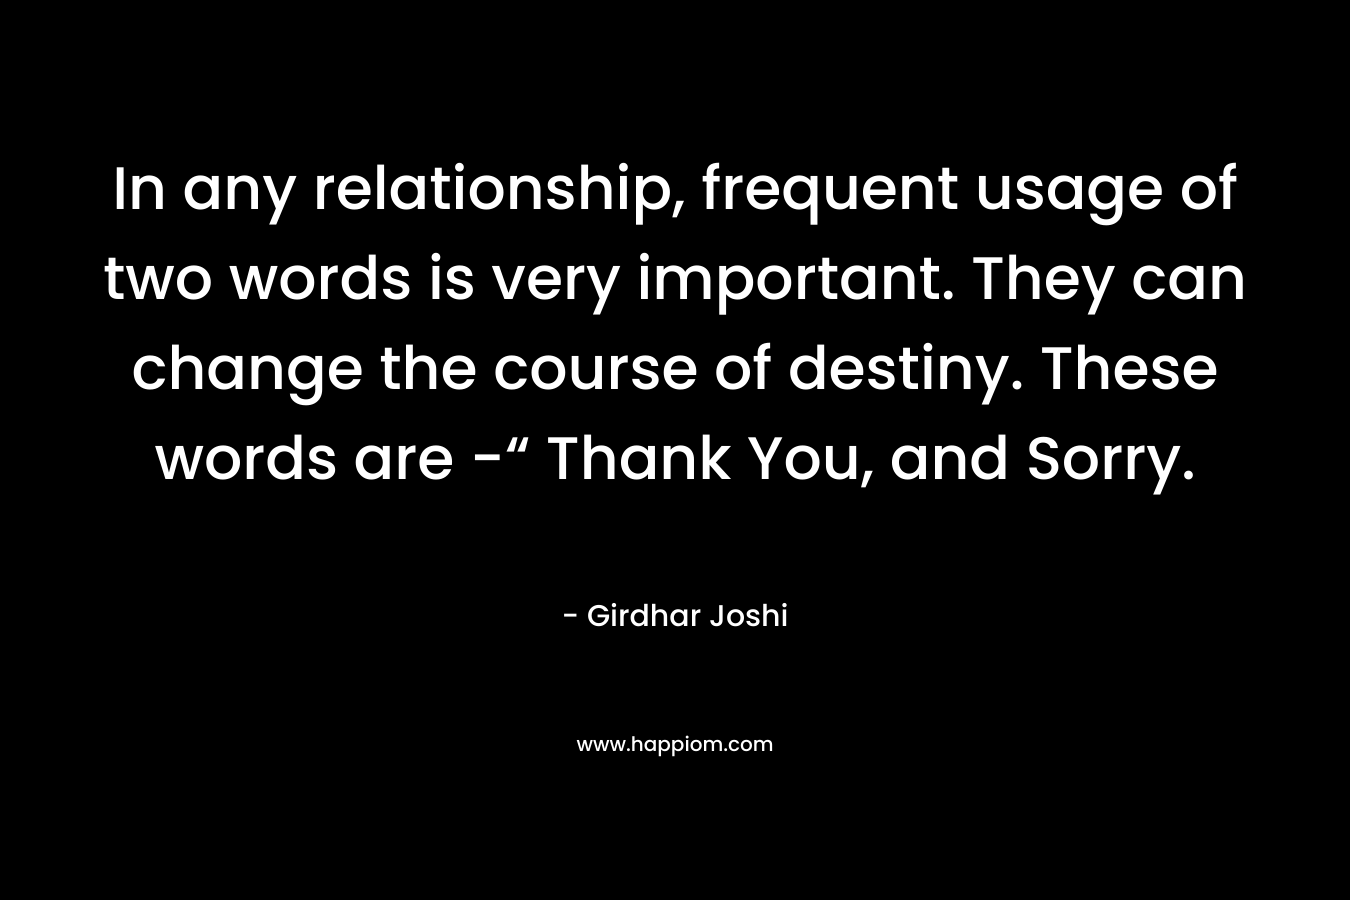 In any relationship, frequent usage of two words is very important. They can change the course of destiny. These words are -“ Thank You, and Sorry.